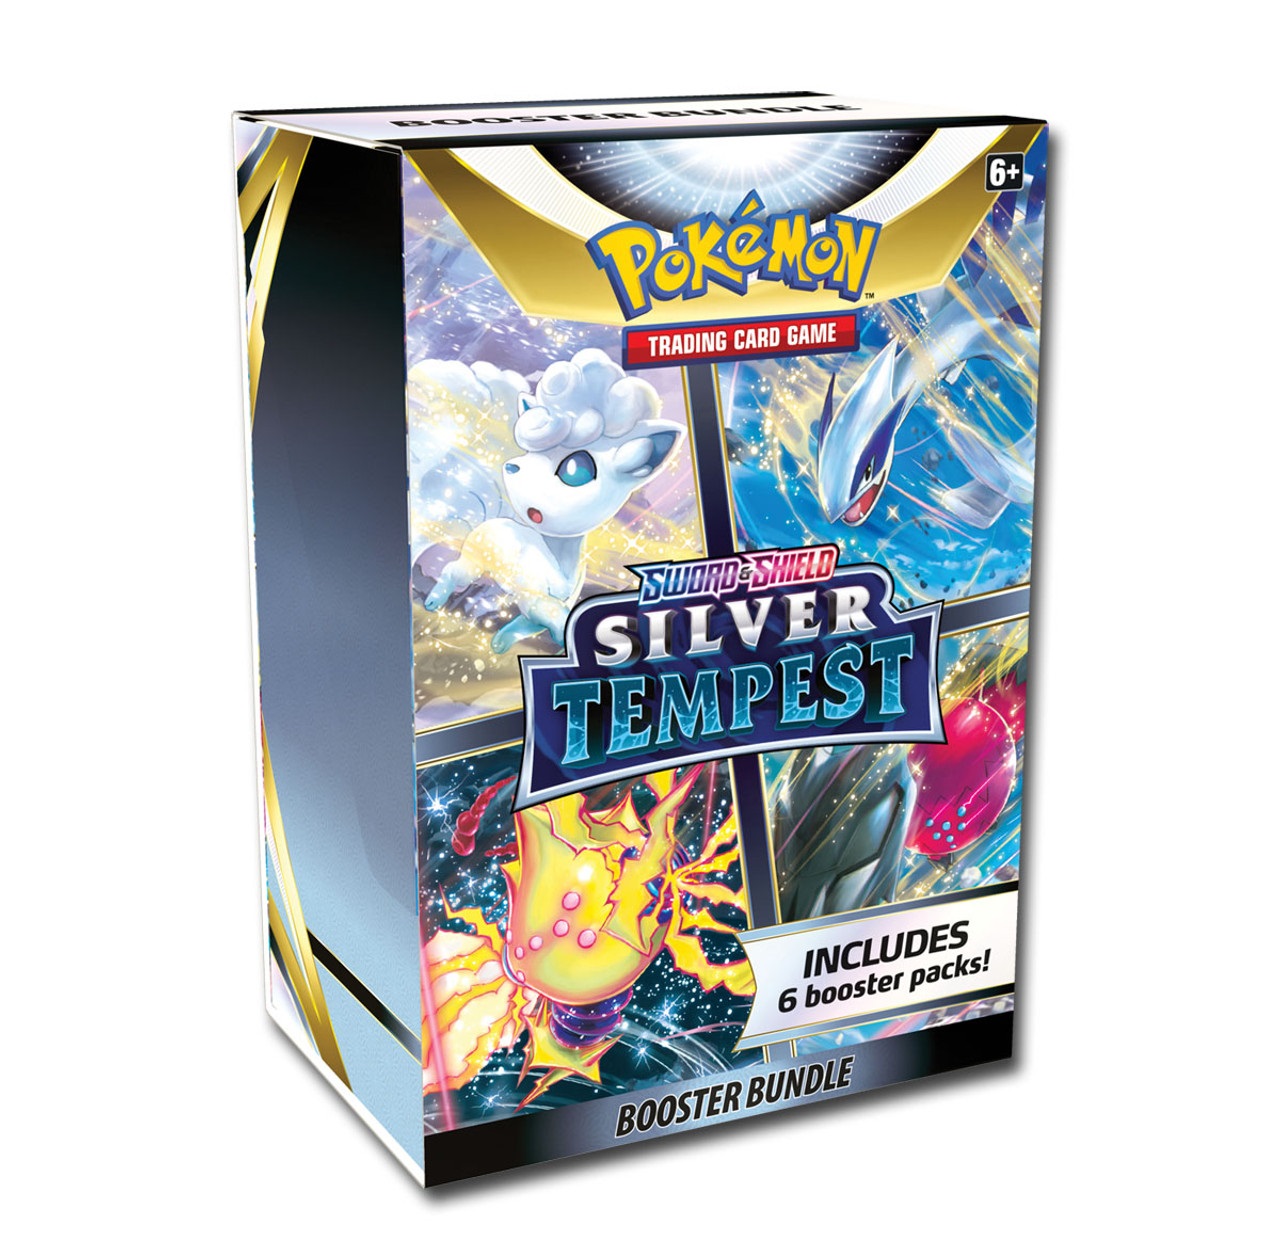 Sword and Shield Silver Tempest Booster Bundle